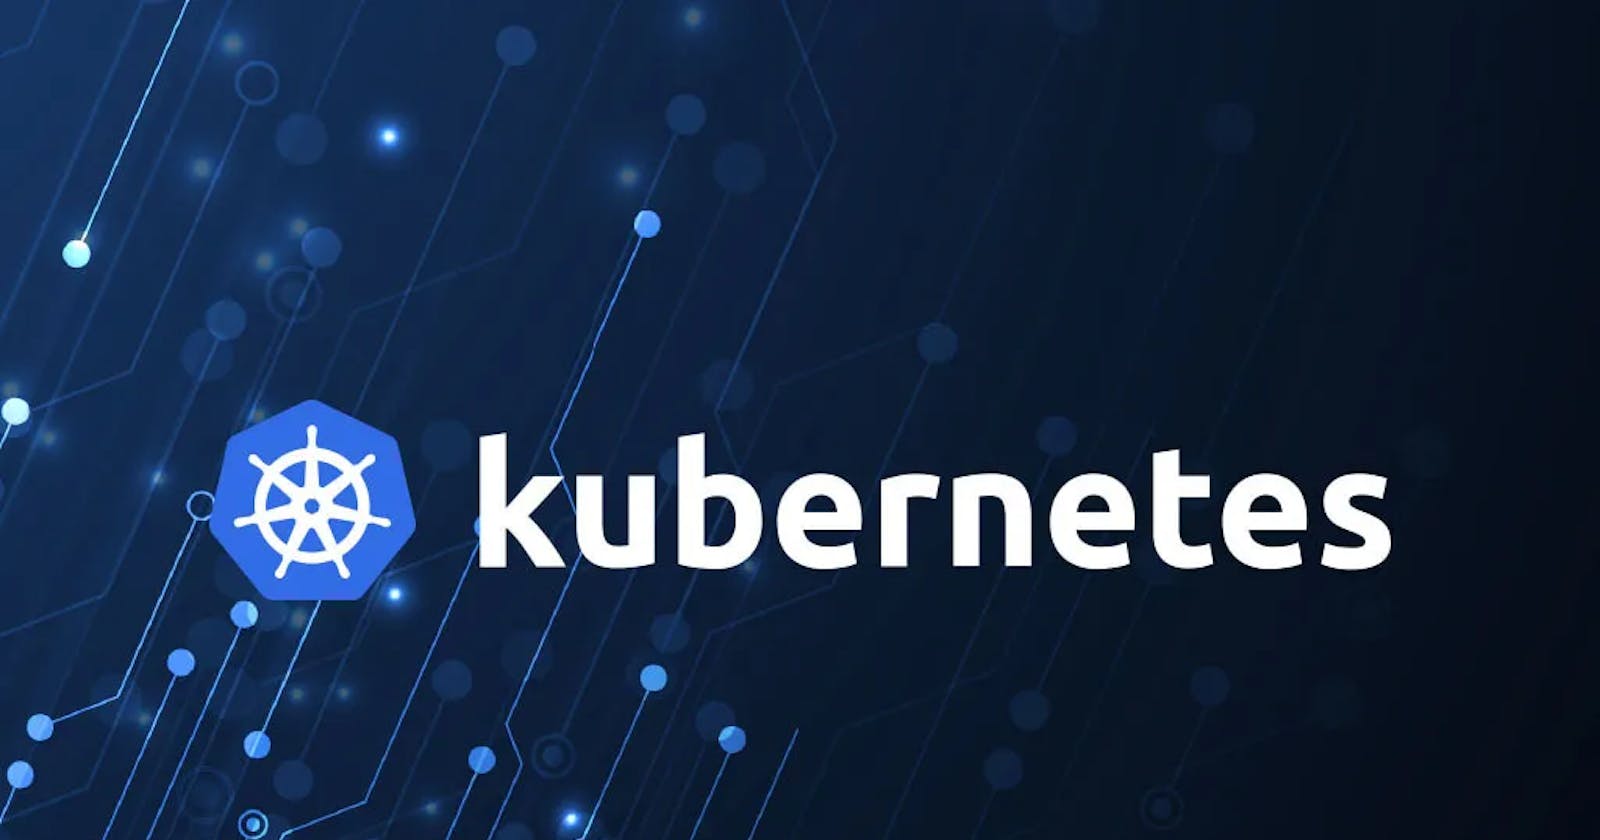 Kubernetes: The Key to Efficient, Automated Cloud Deployments